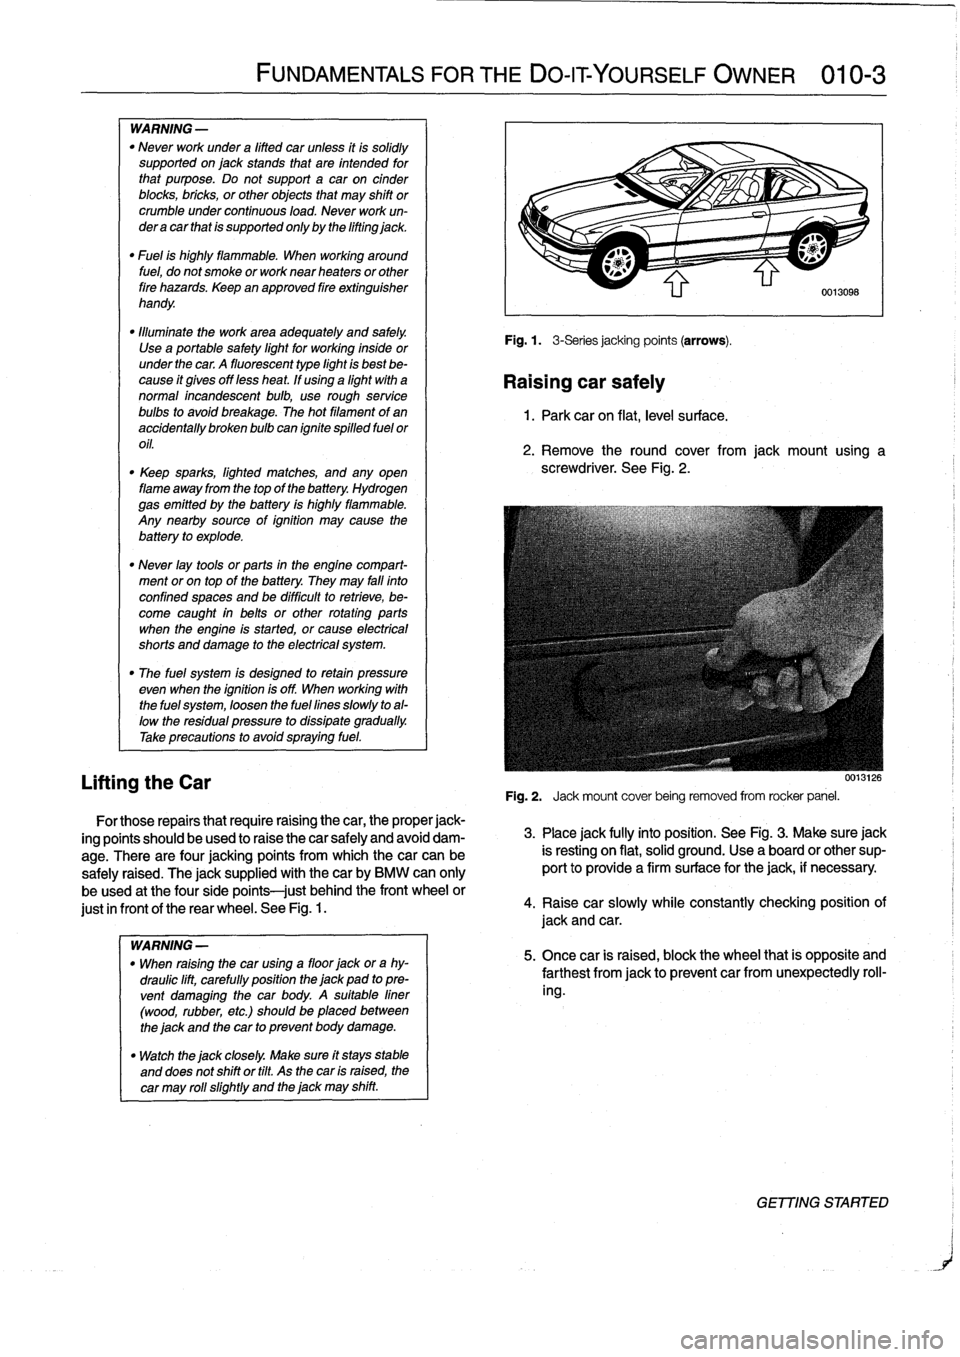 BMW M3 1998 E36 Workshop Manual 
WARNING
-

"
Never
work
under
a
lifted
car
unless
it
is
solidly
supported
on
jack
stands
that
are
intended
for
that
purpose
.
Do
not
support
a
car
on
cinder
blocks,
bricks,
or
other
objects
that
may
